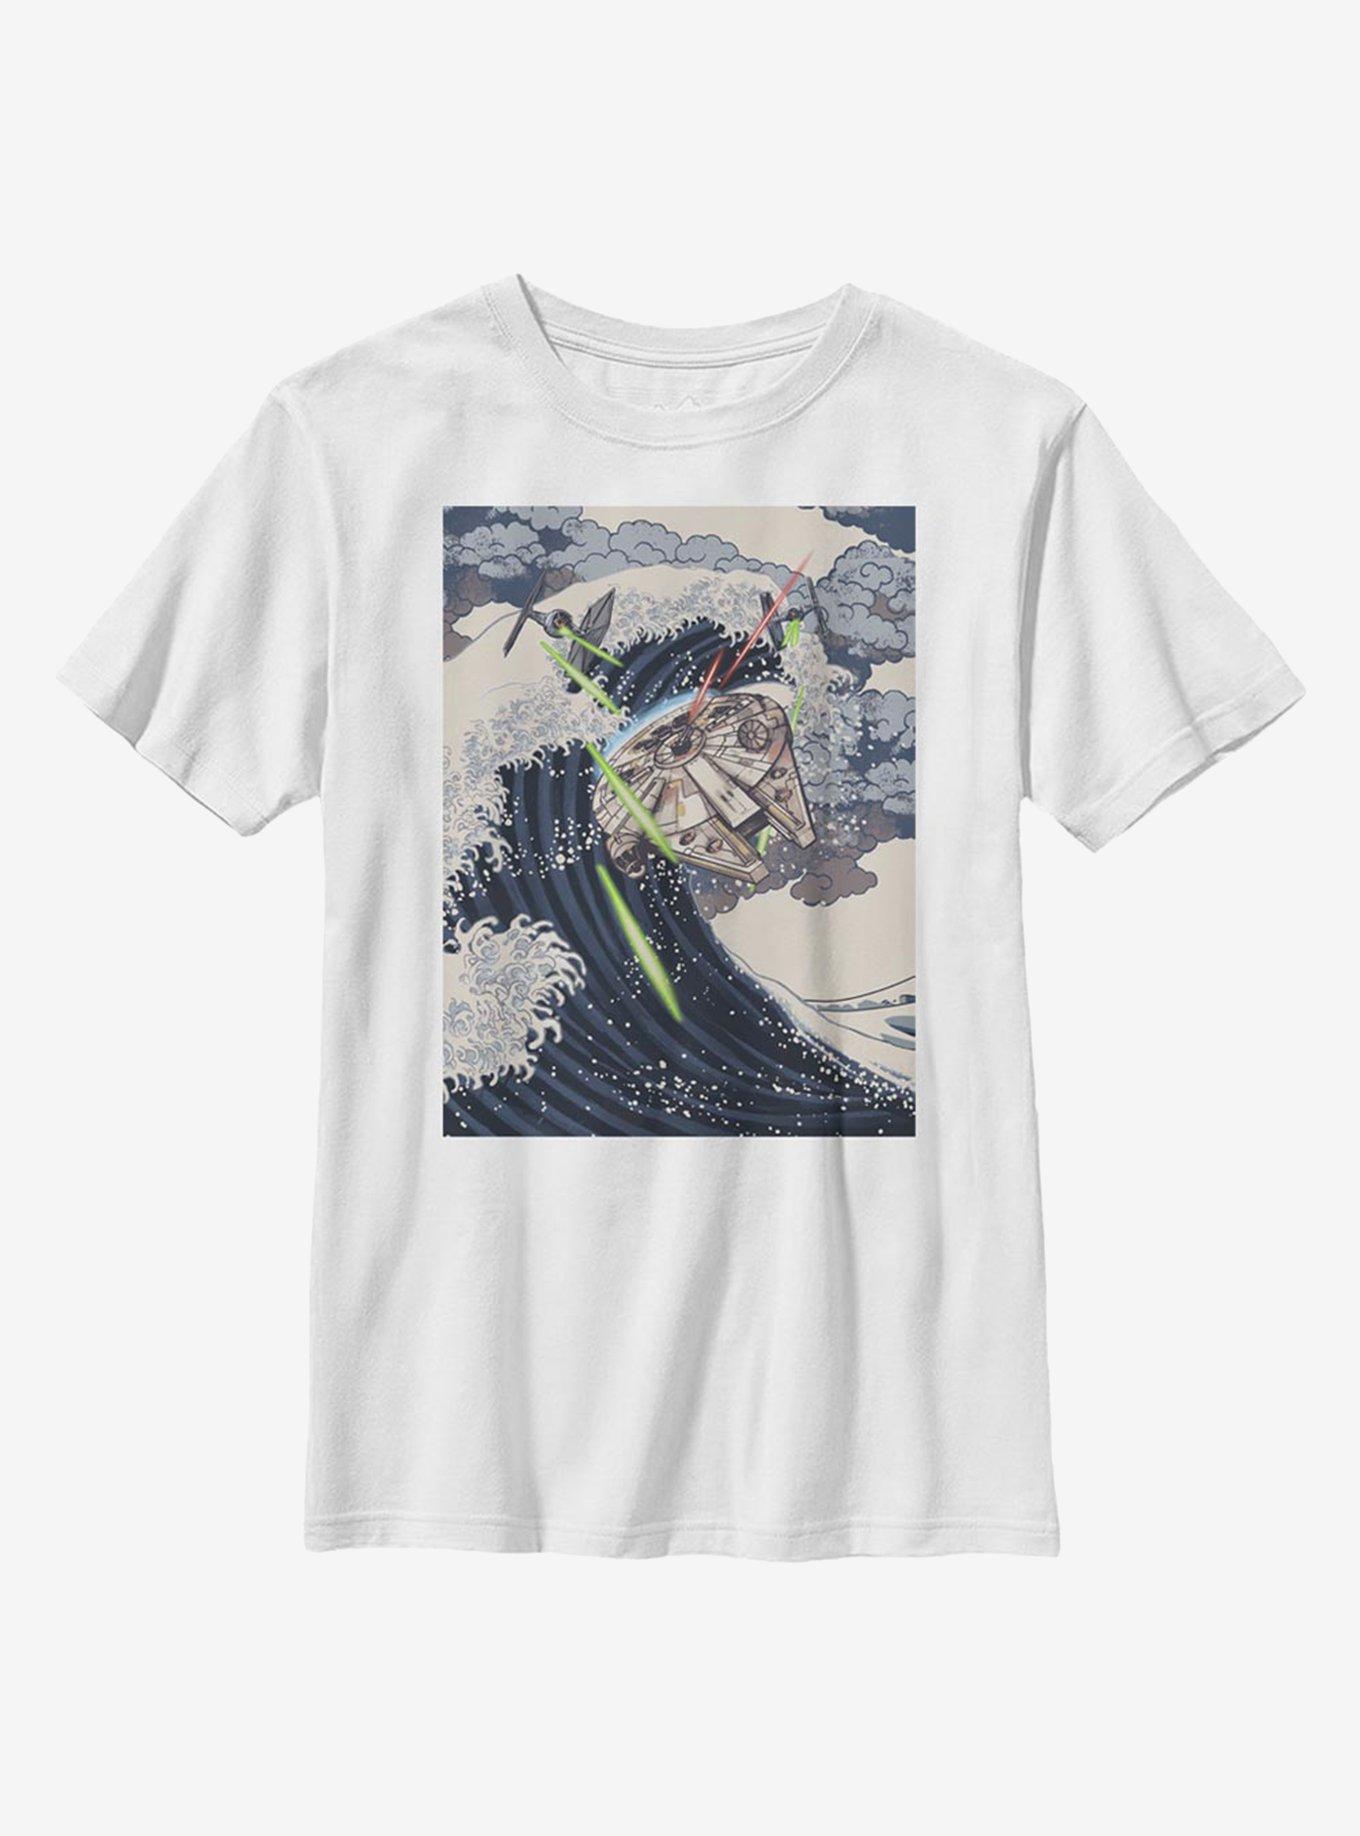 Star Wars Space Wave Youth T-Shirt, WHITE, hi-res